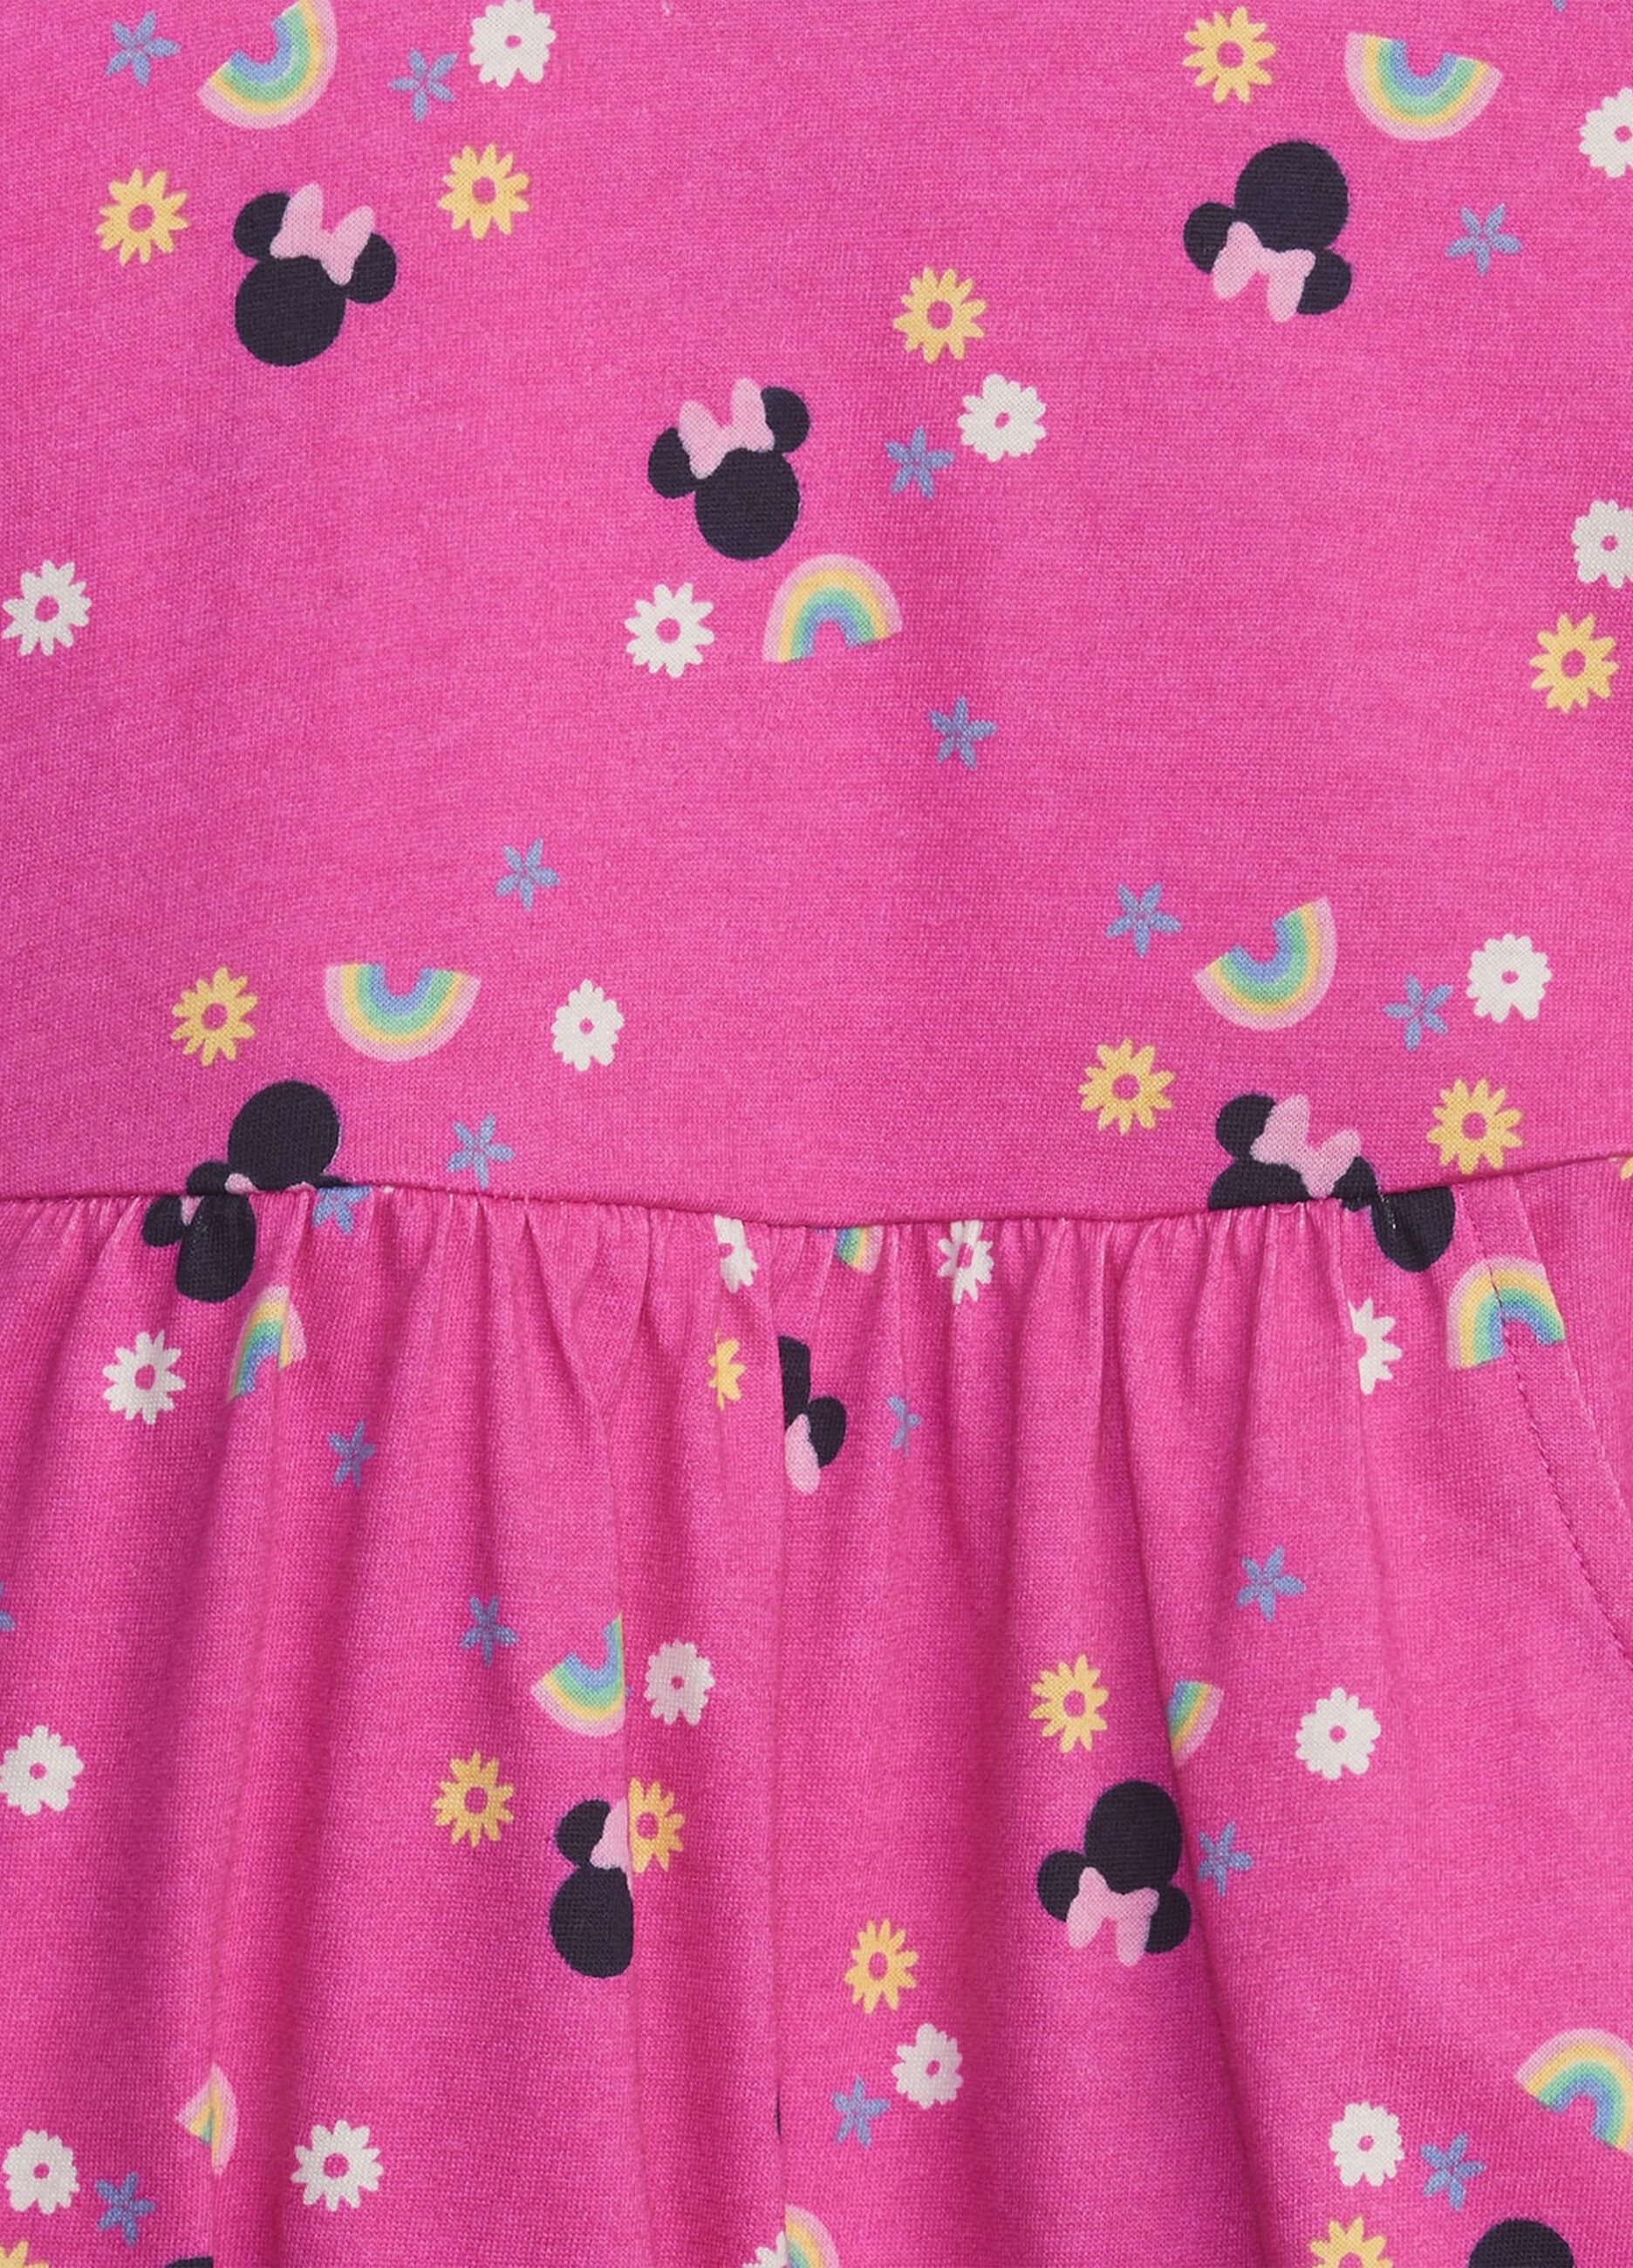 Short dress with Disney Minnie Mouse print